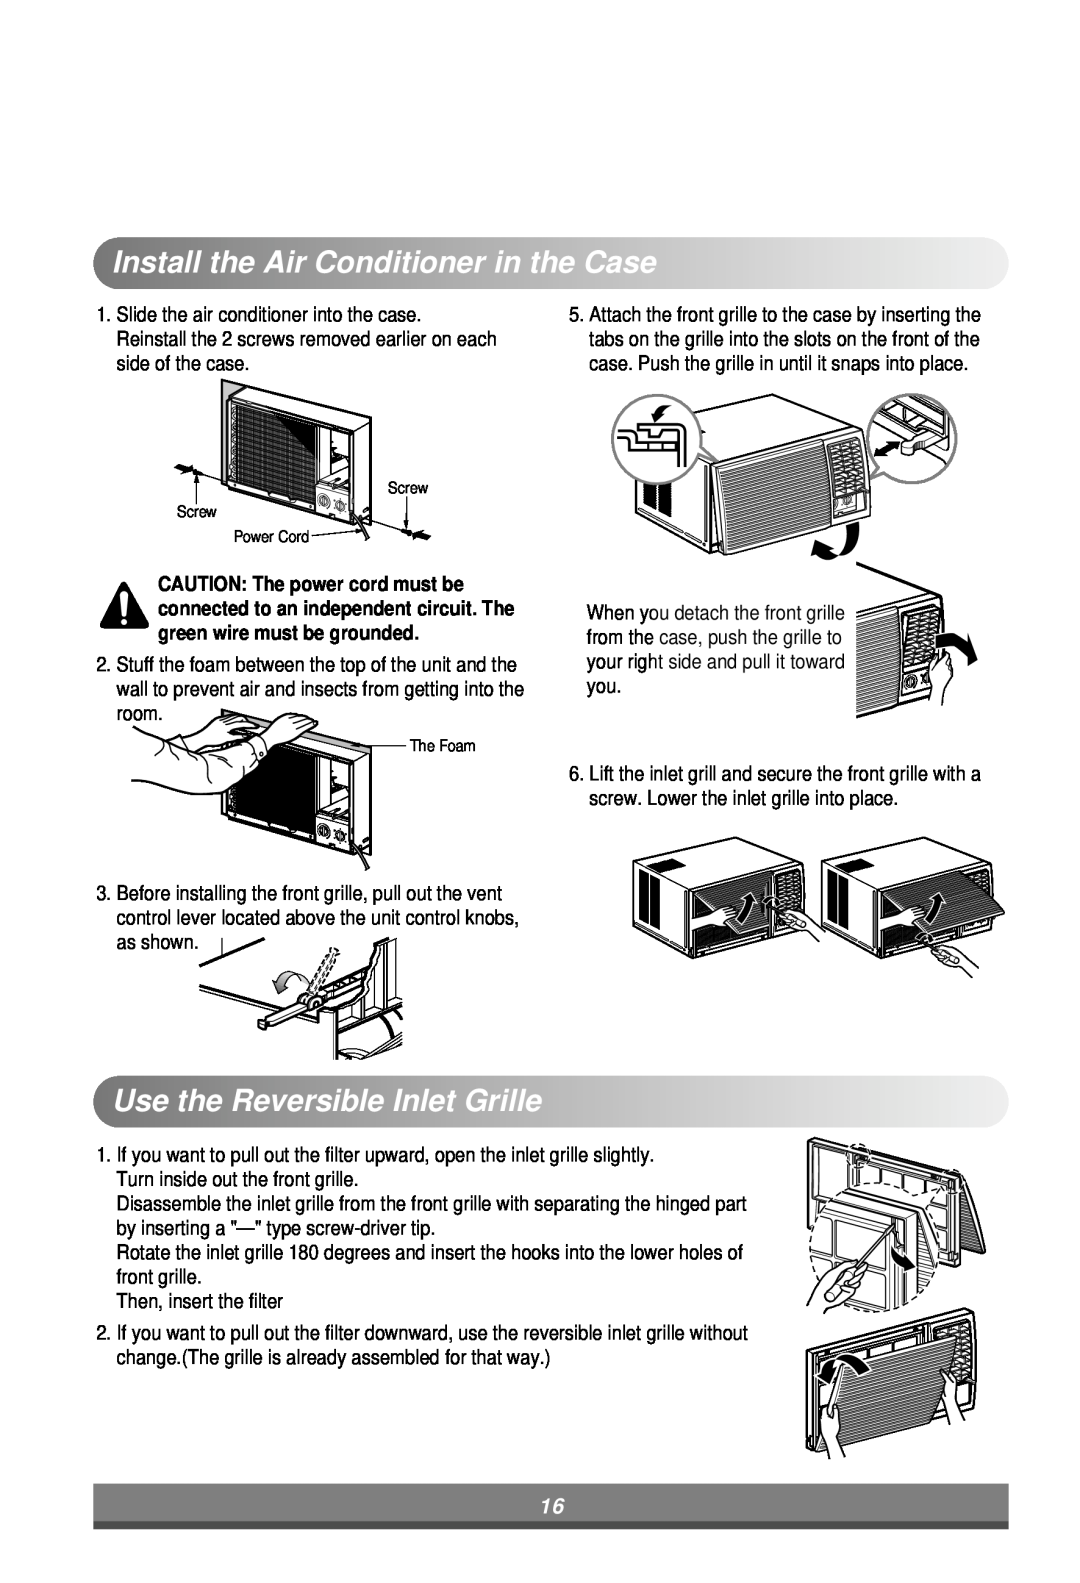 Minolta W121CA TSC2 owner manual InstalltheAirConditionerintheCase, Use theReversibleInletGrille 